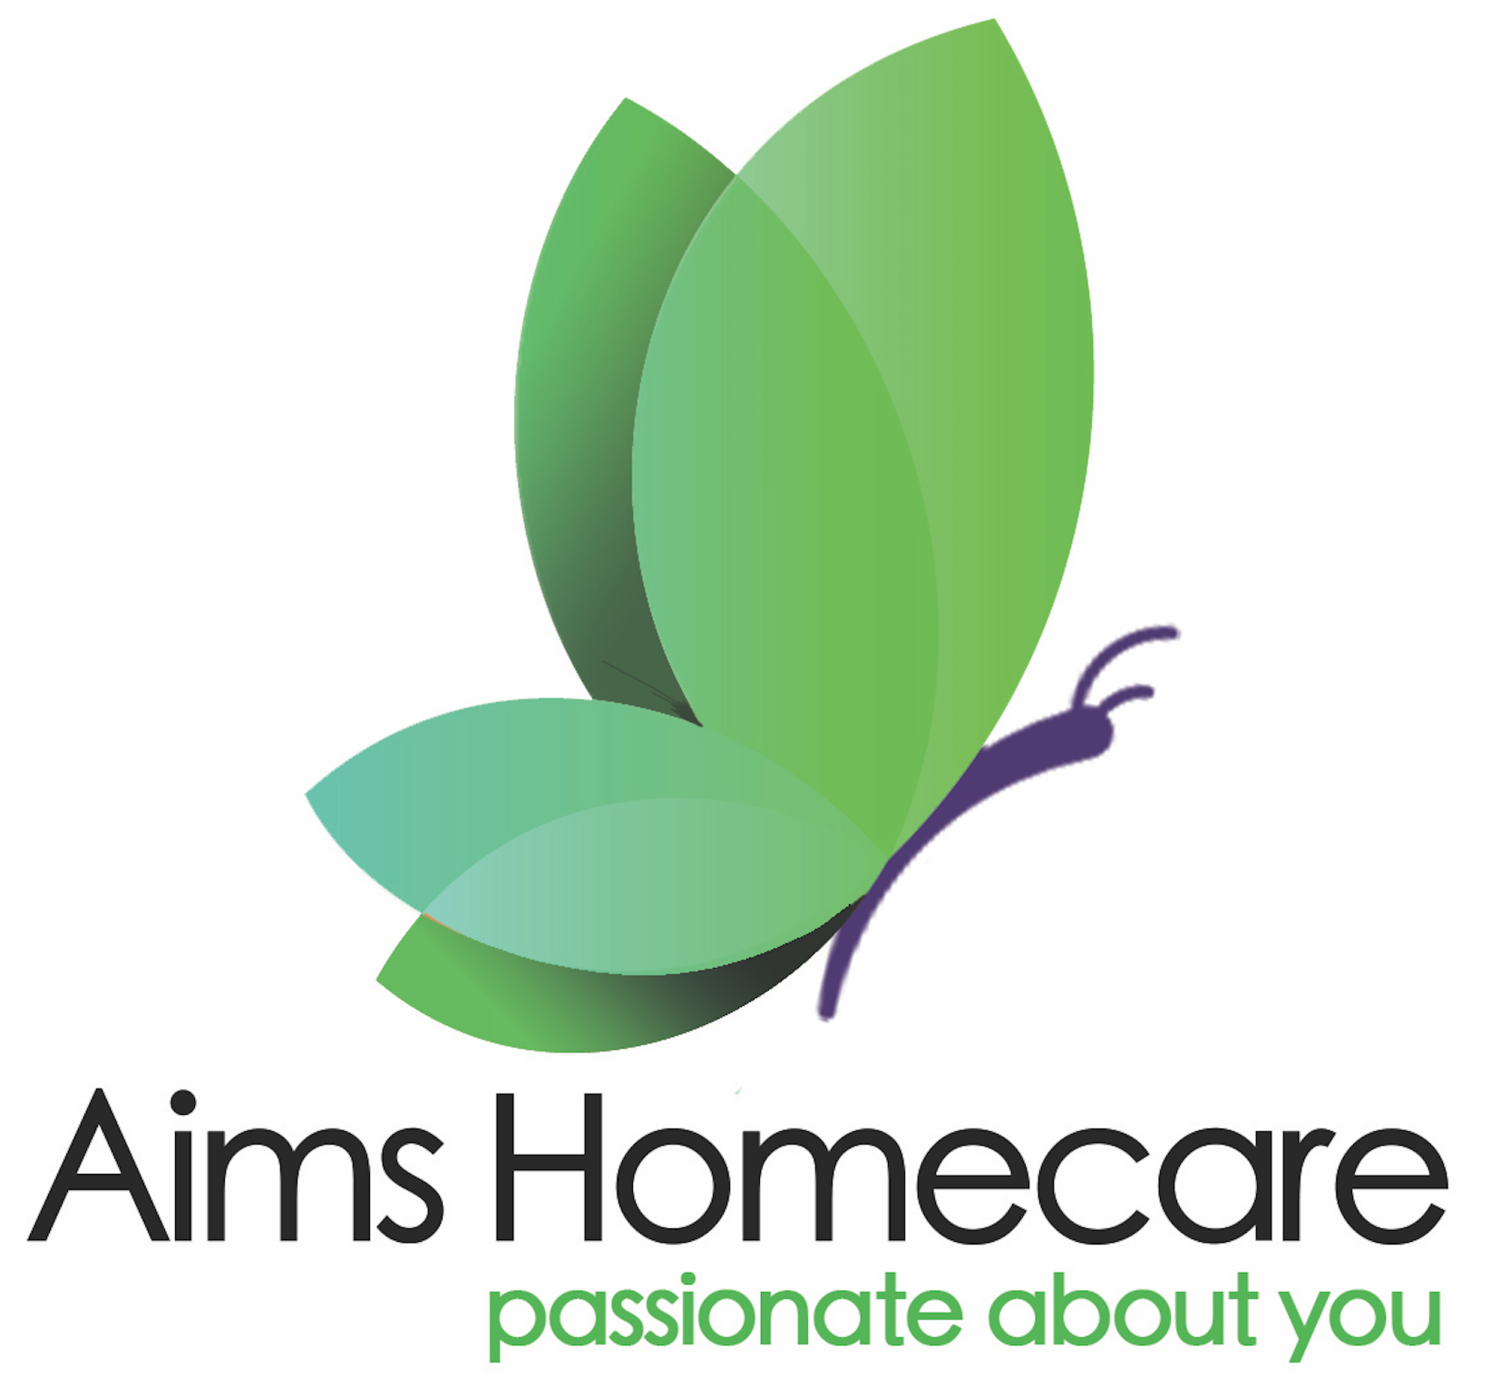 About Us — Aims Homecare Limited